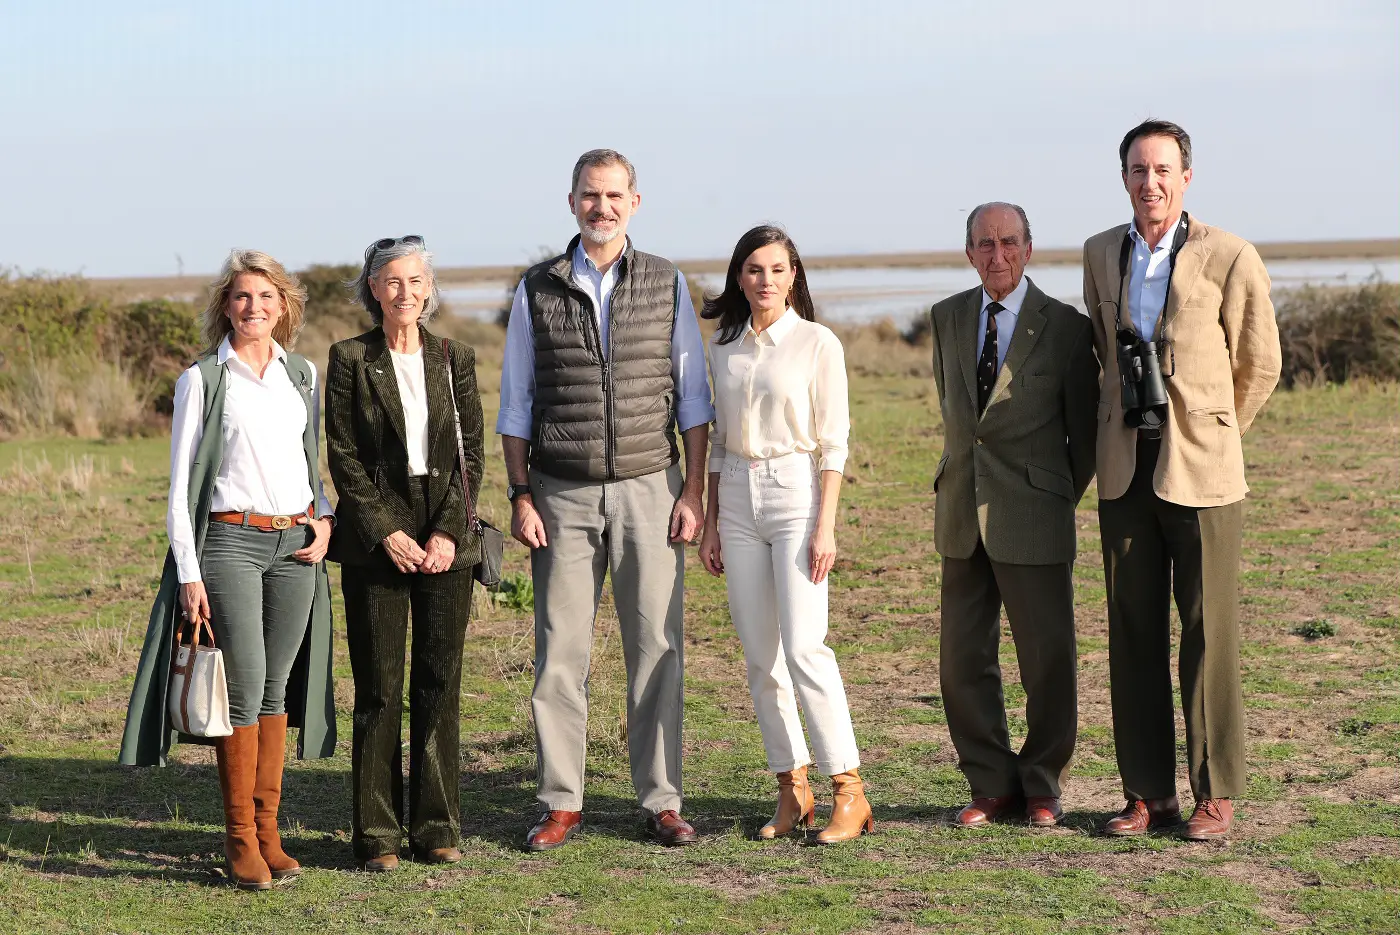 King Felipe and Queen Letizia of Spain visited National Park on Valentine's Day